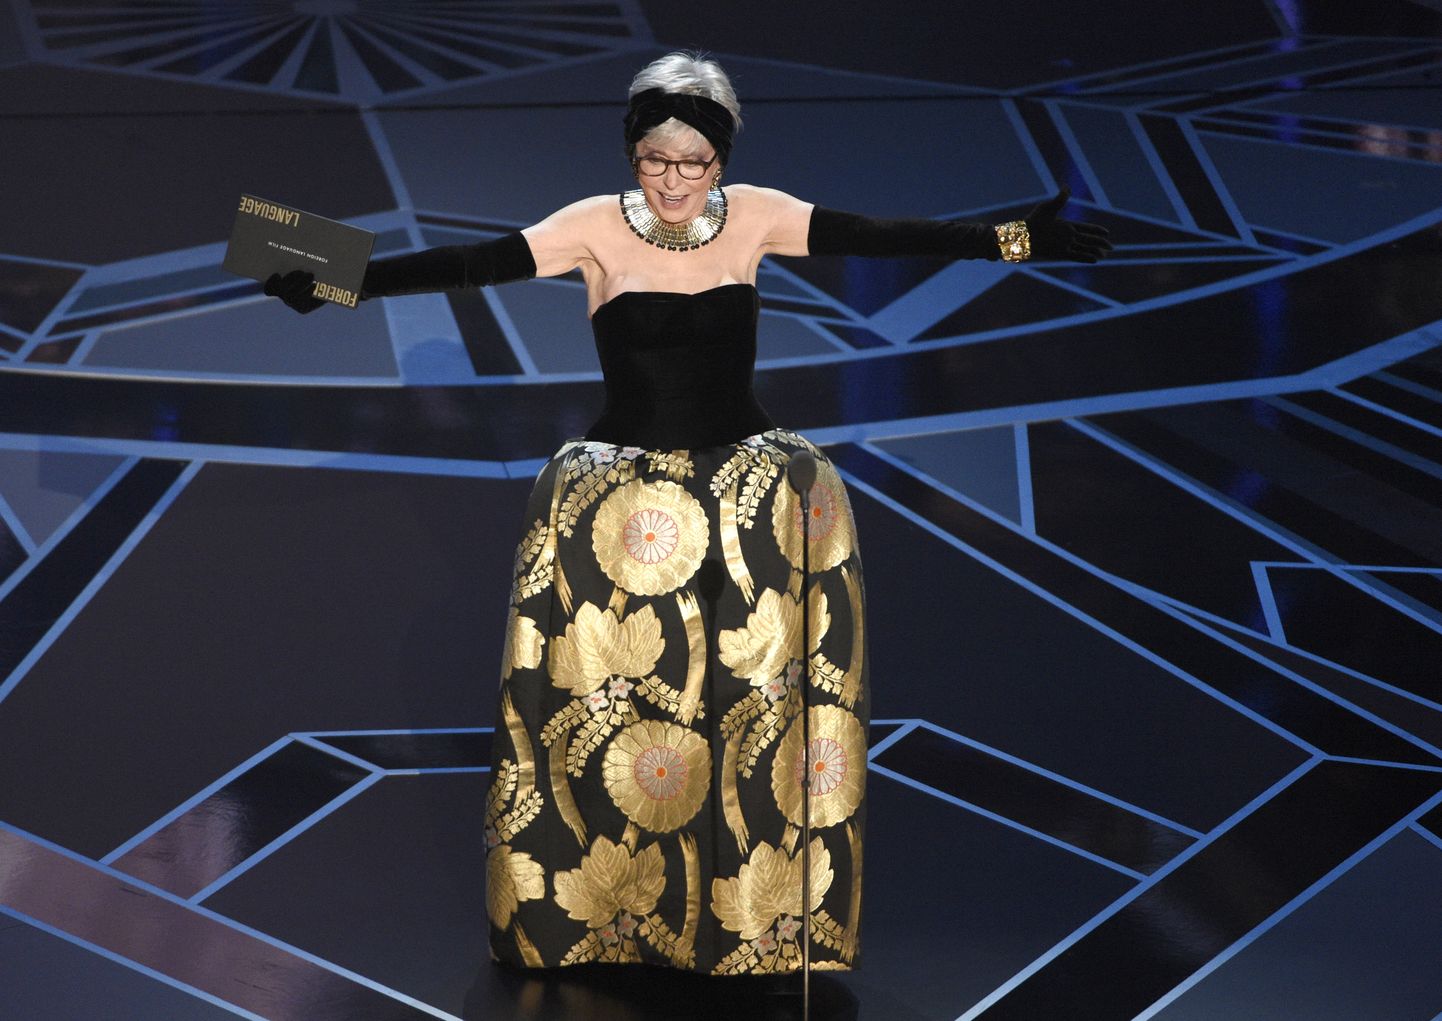 Rita Moreno presents the award for best foreign language film at the Oscars on Sunday, March 4, 2018, at the Dolby Theatre in Los Angeles. (Photo by Chris Pizzello/Invision/AP)